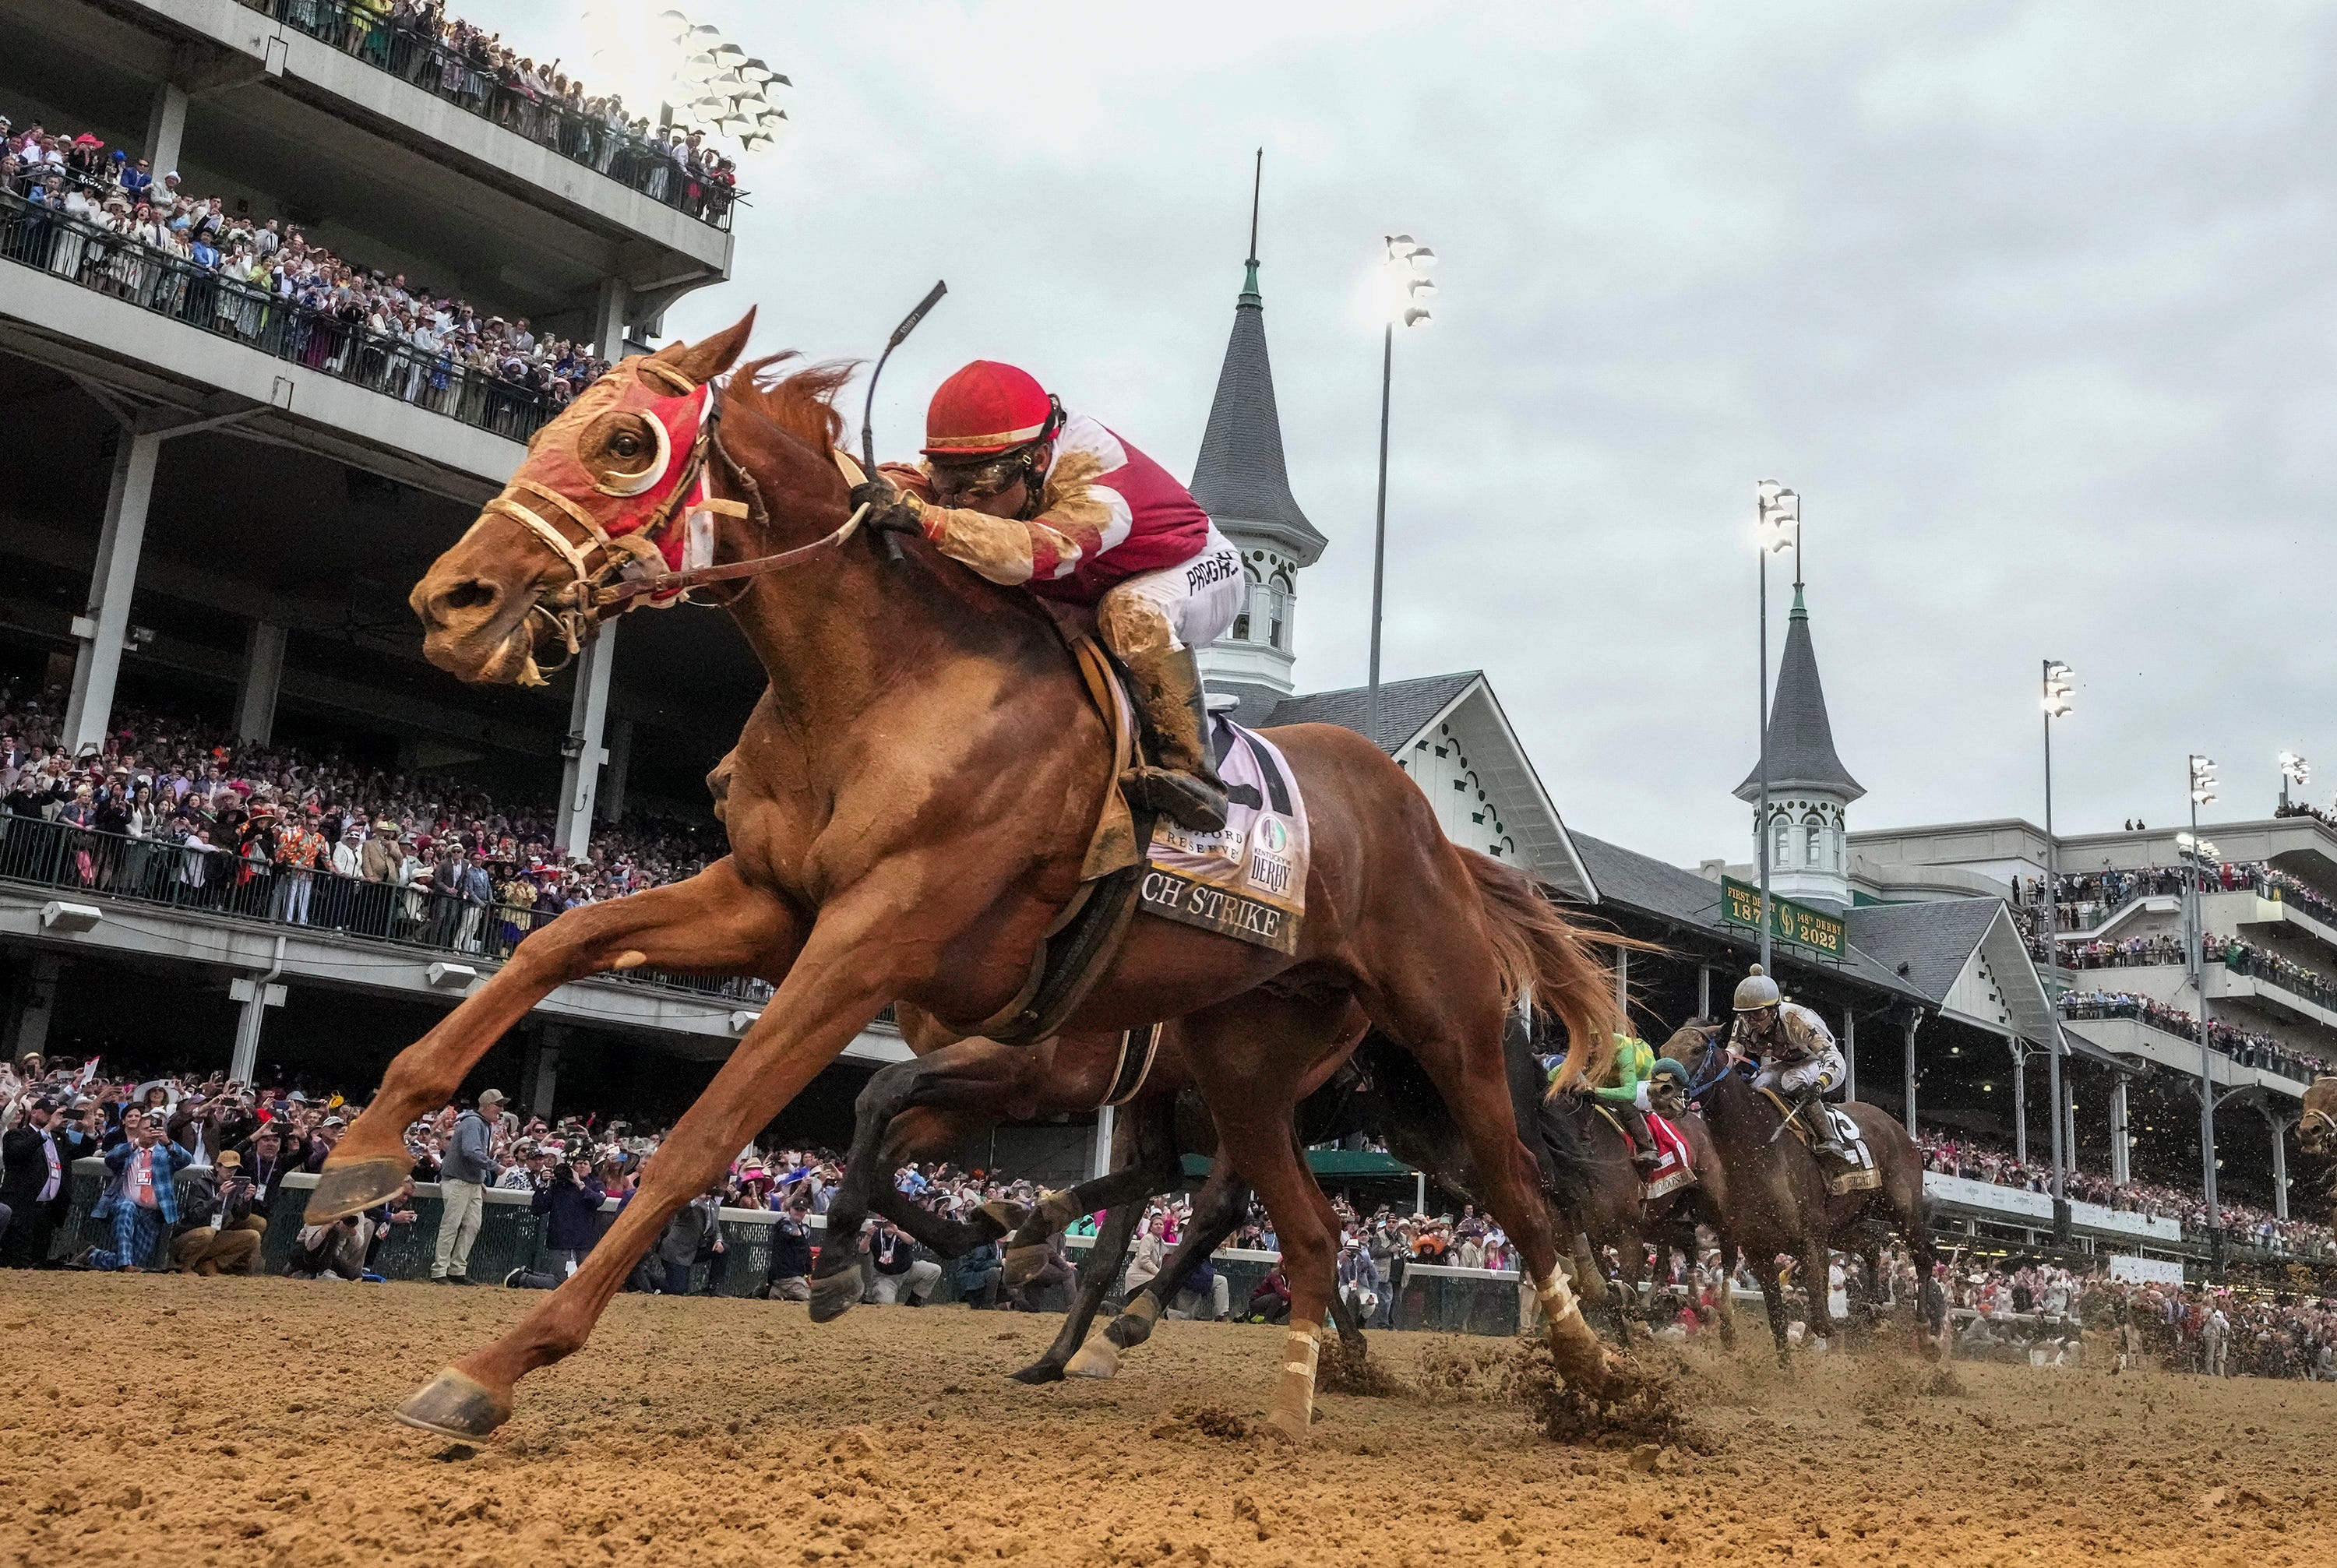 Derby payouts 2022 Records set after148th Kentucky Derby